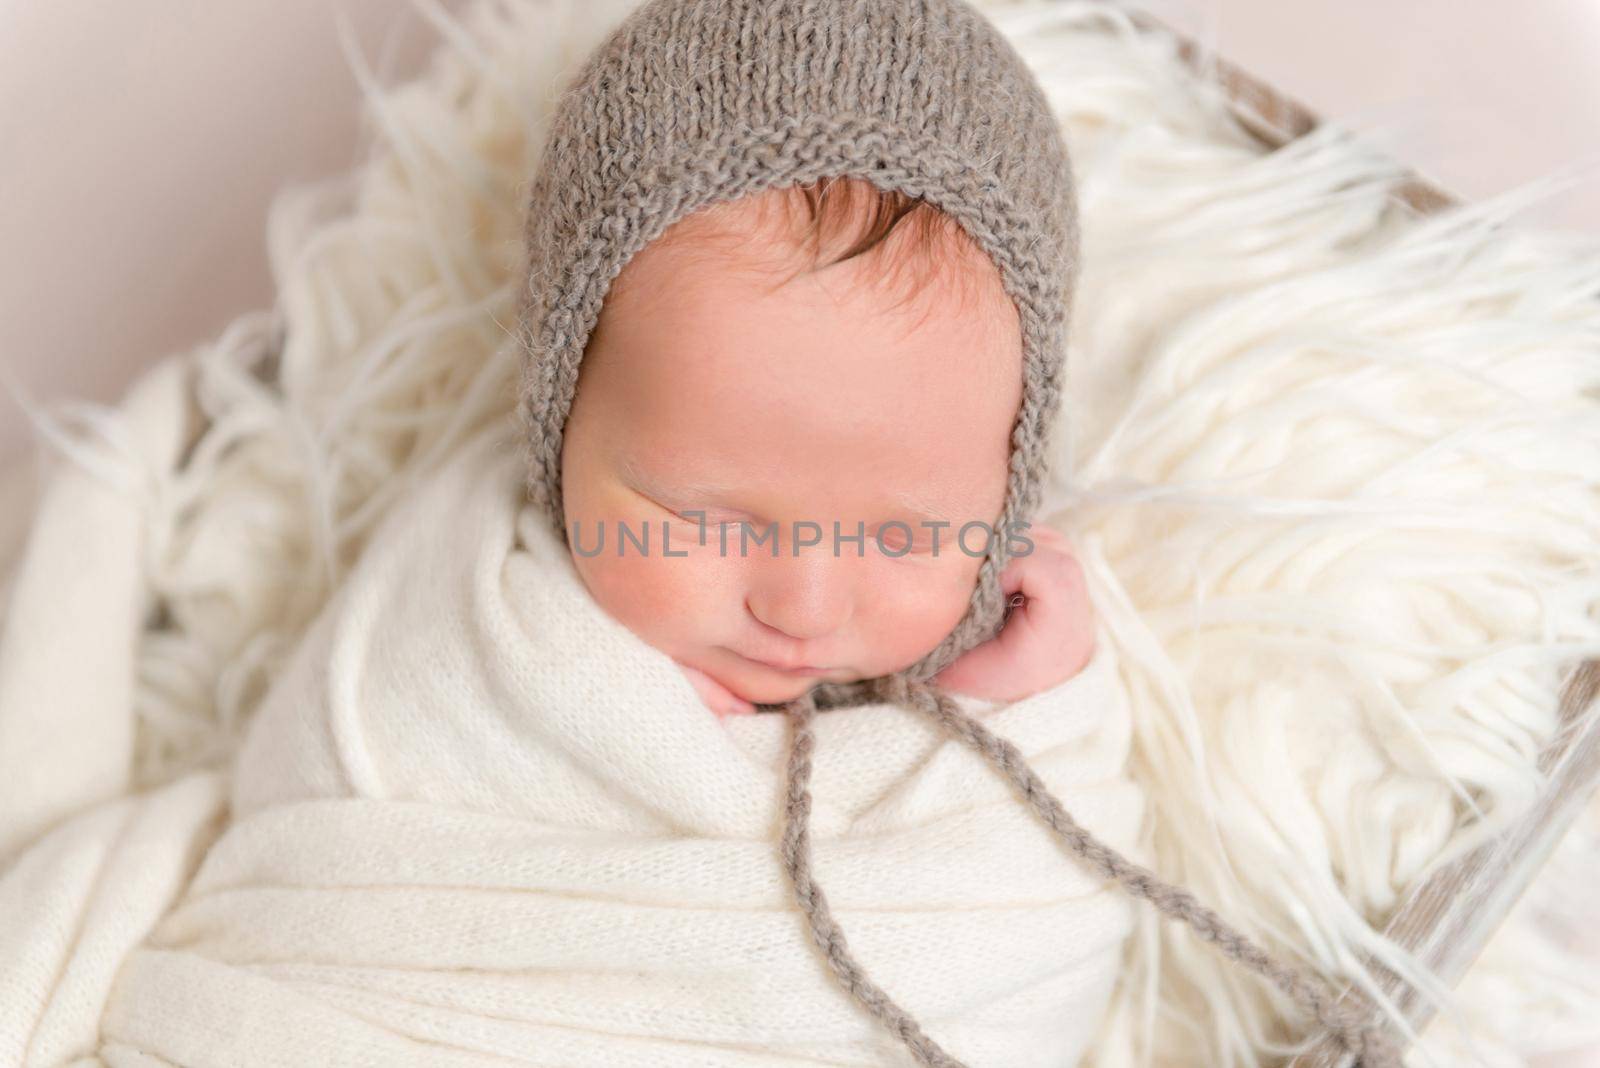 infant with gray hat on napping, closeup by tan4ikk1